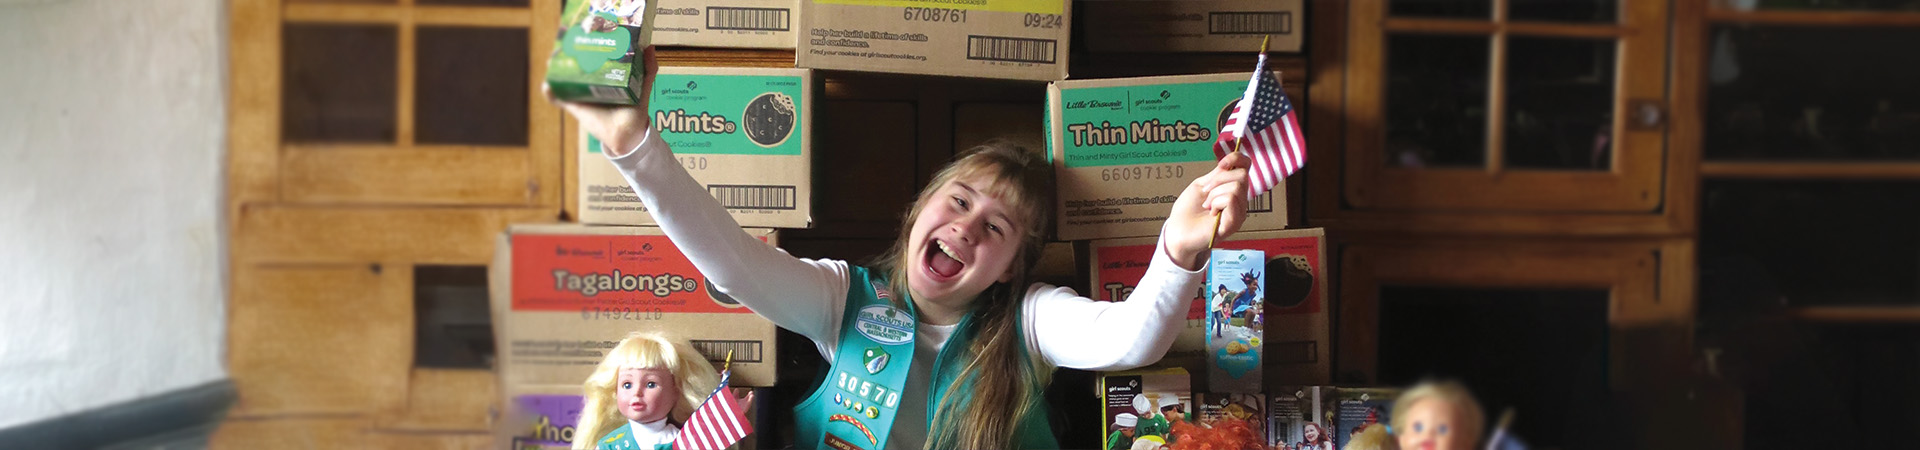  A girl sitting on a cookie throne holding an American flag and a box of Thin Mints 